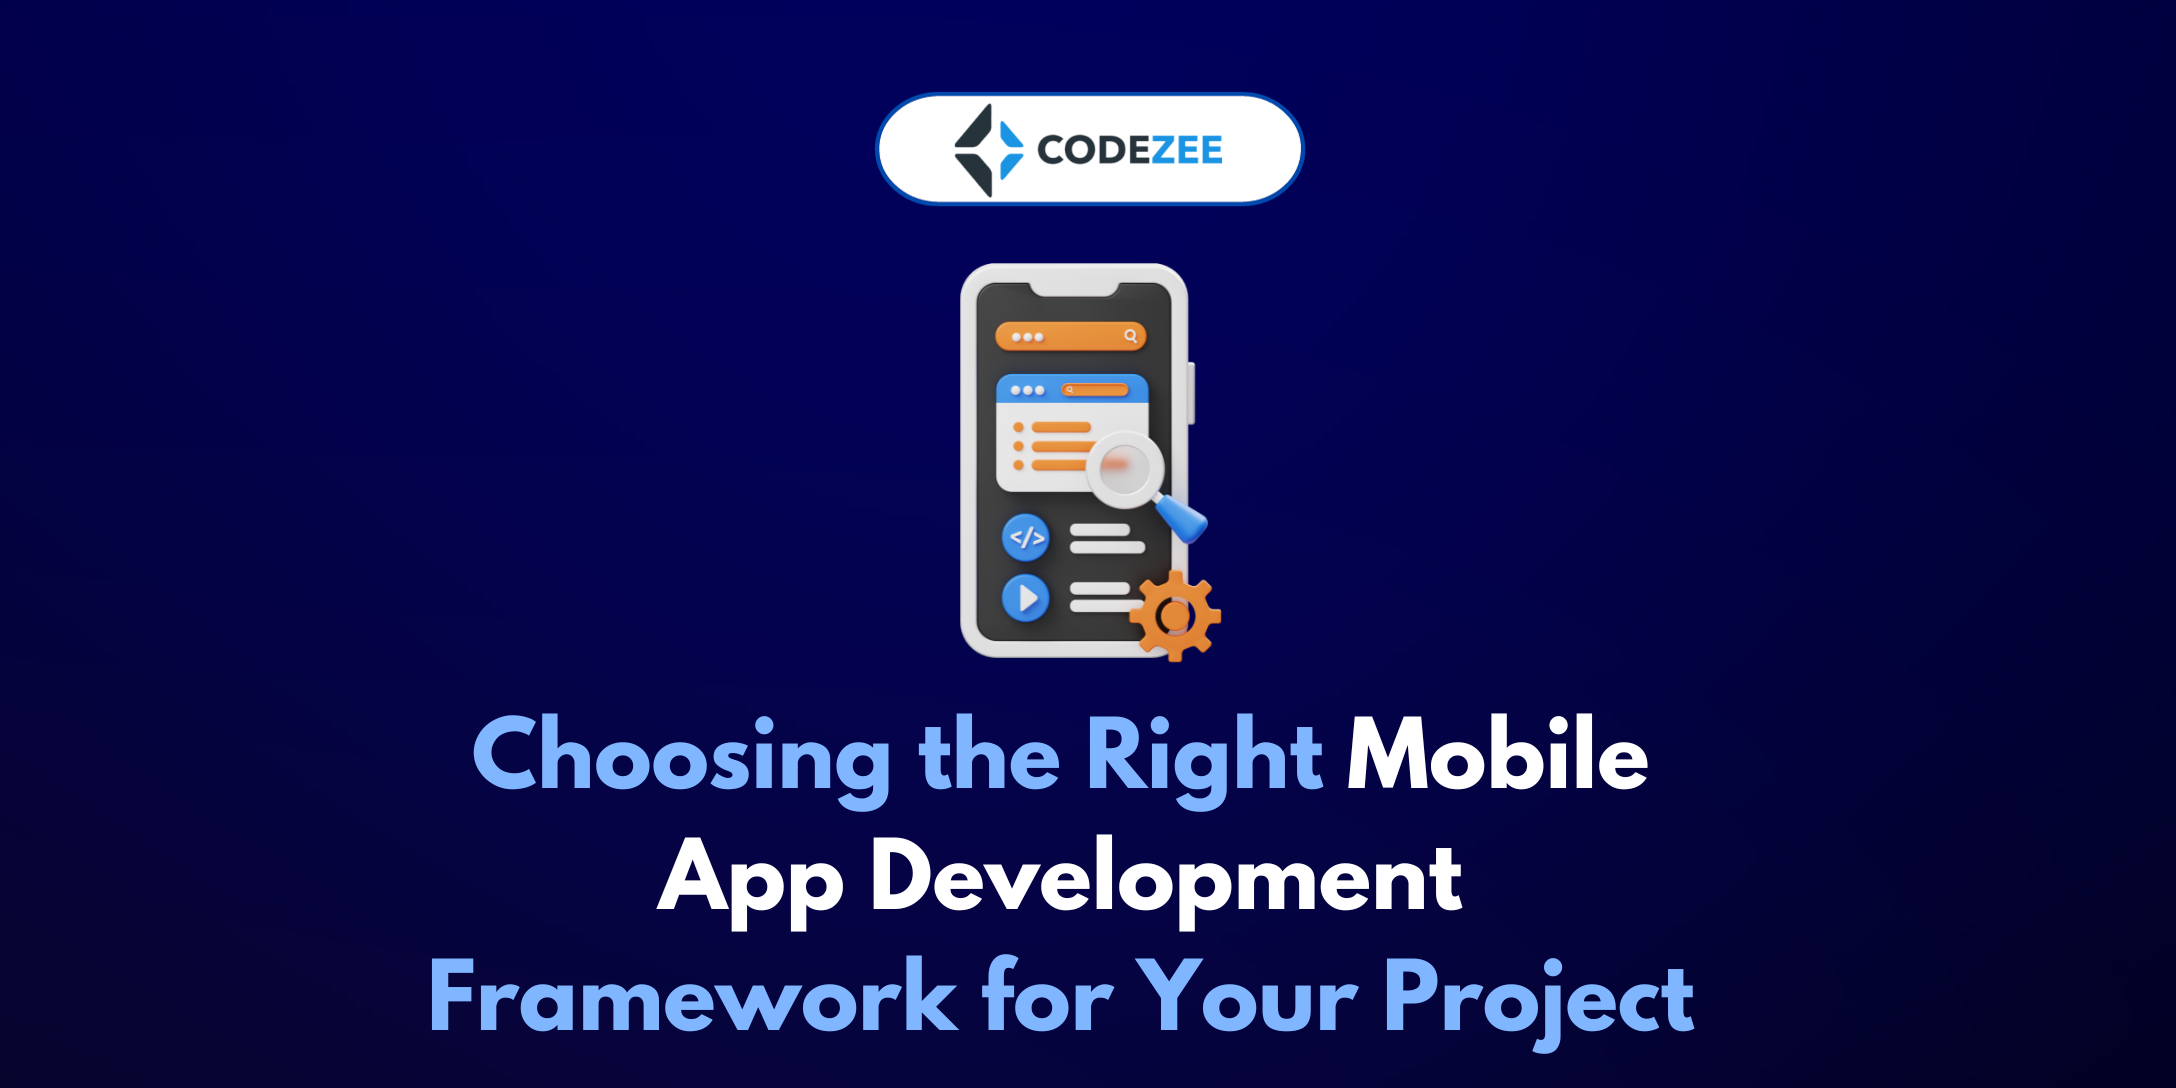 Choosing the Right Mobile App Development Framework for Your Project